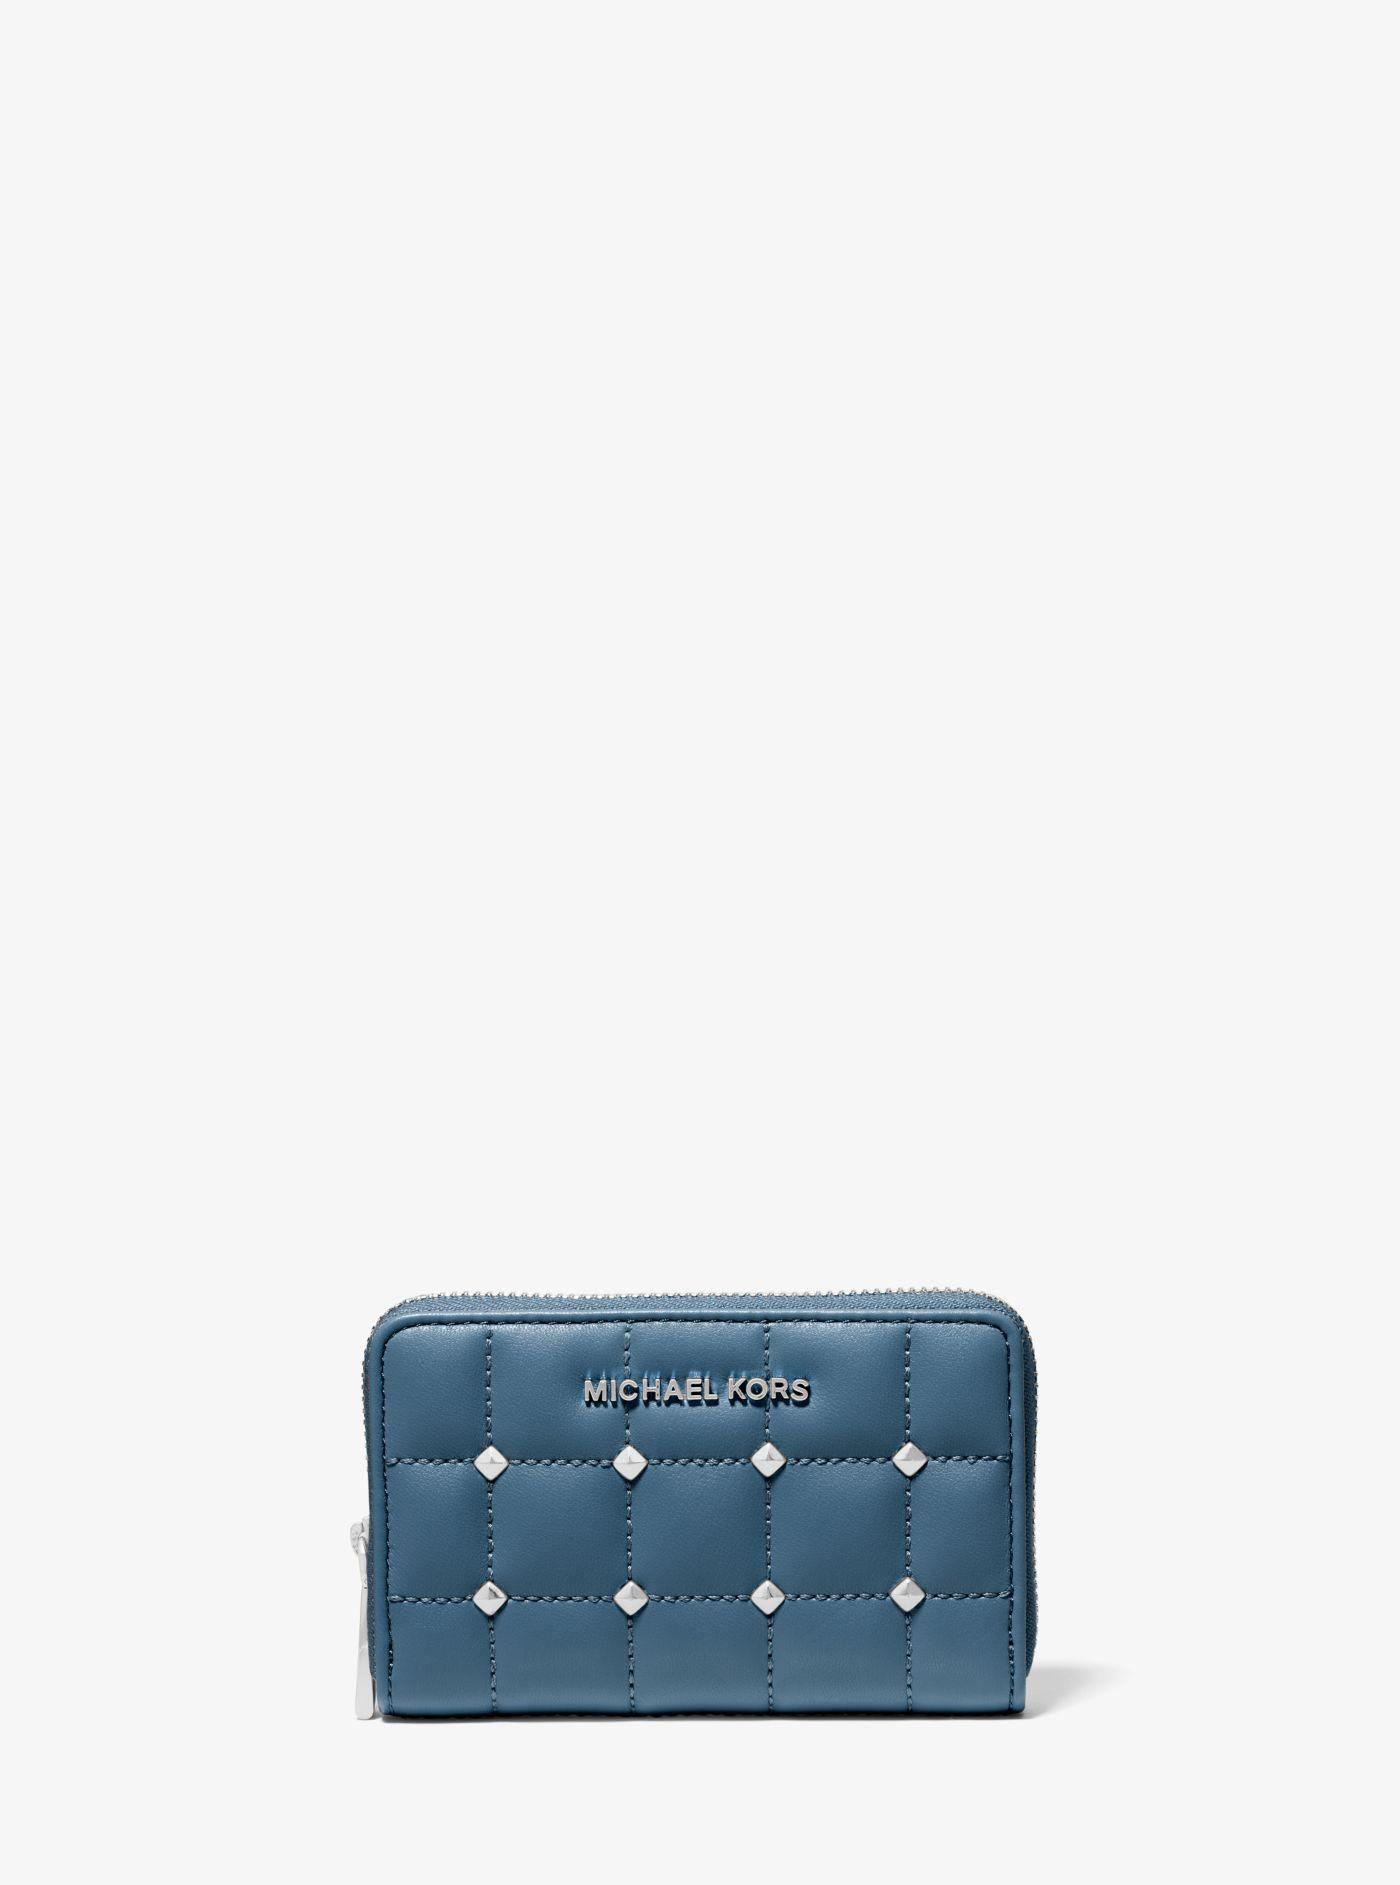 Jeg vasker mit tøj Ti år Akkumulerede Michael Kors Leather Small Studded Quilted Wallet in Chambray (Blue) - Lyst